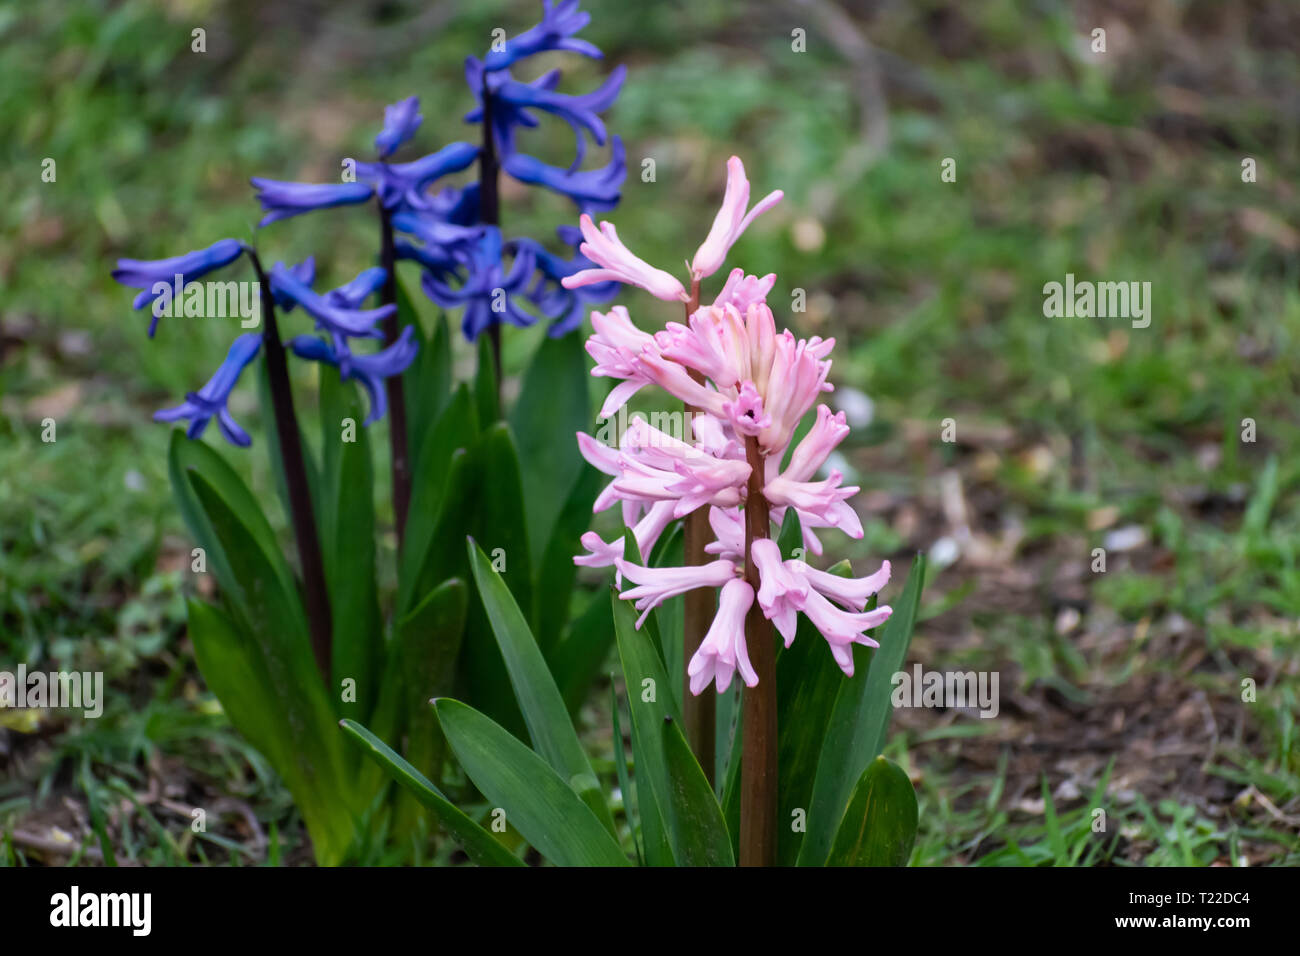 Wood Hyacinths, pink and blue. Scilla campanulata genus species name. garden flowers in the park. Stock Photo